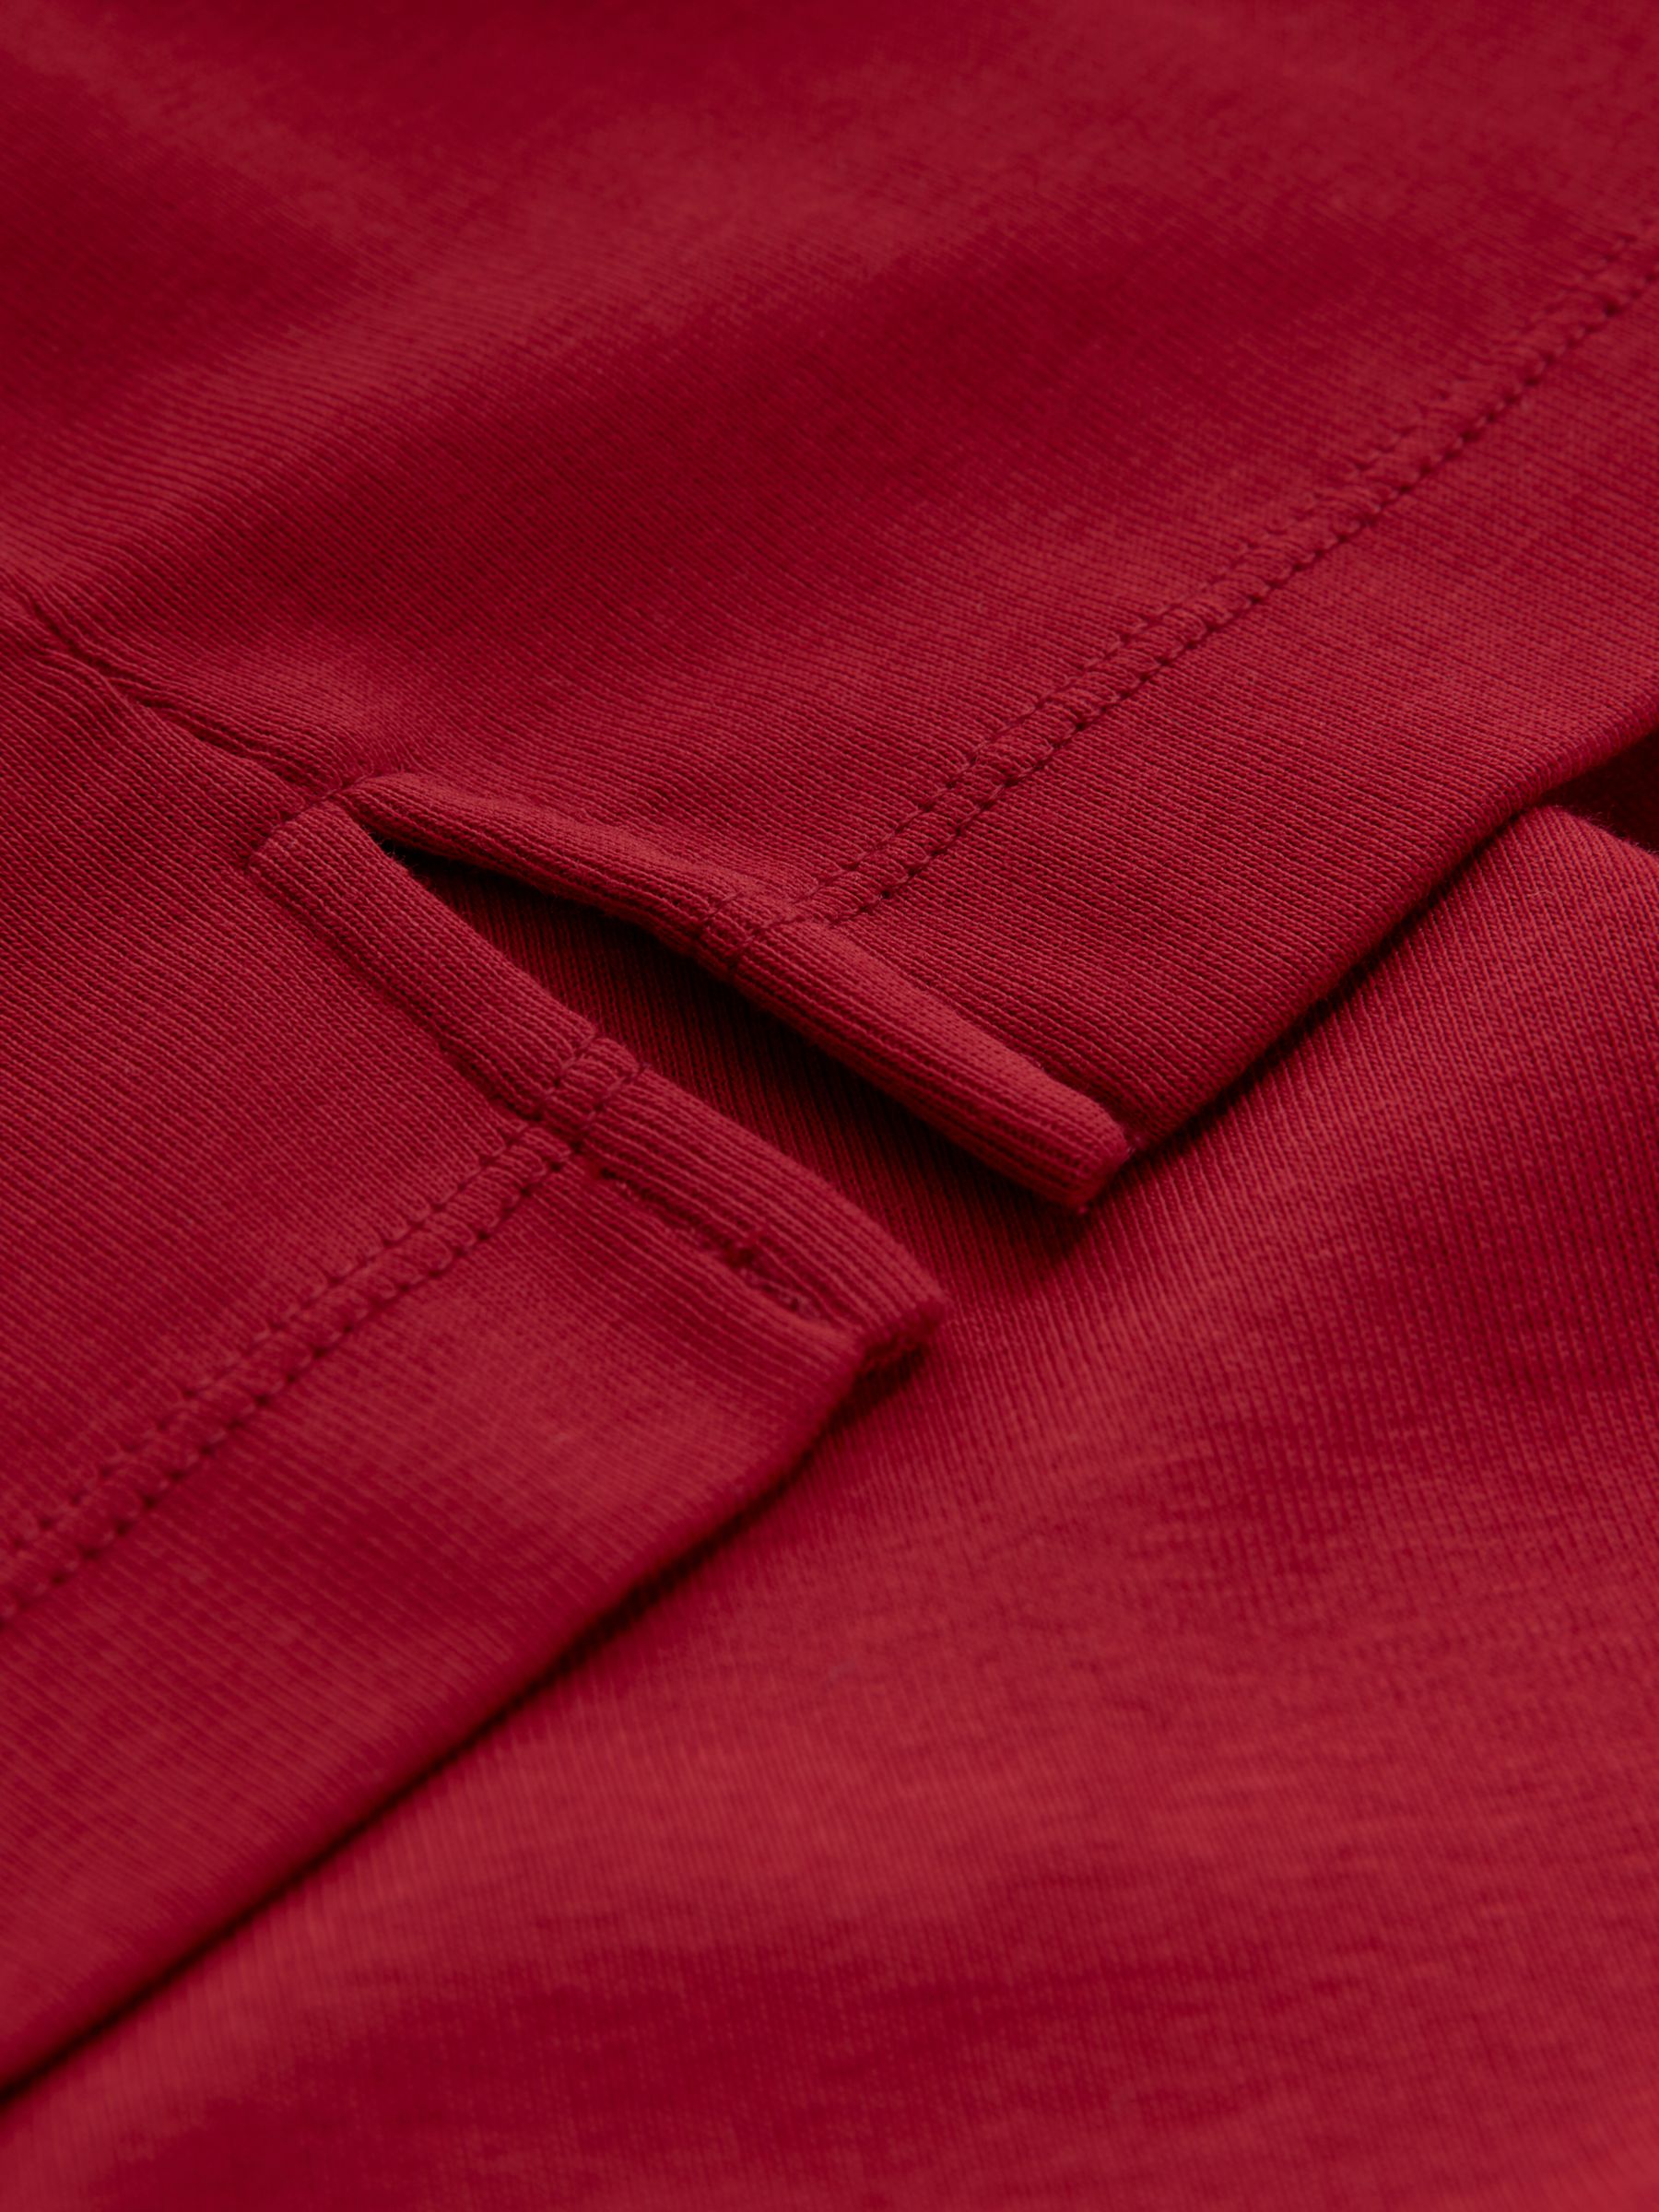 Buy Celtic & Co. Organic Cotton Button Through Jersey Top, Pillarbox Red Online at johnlewis.com